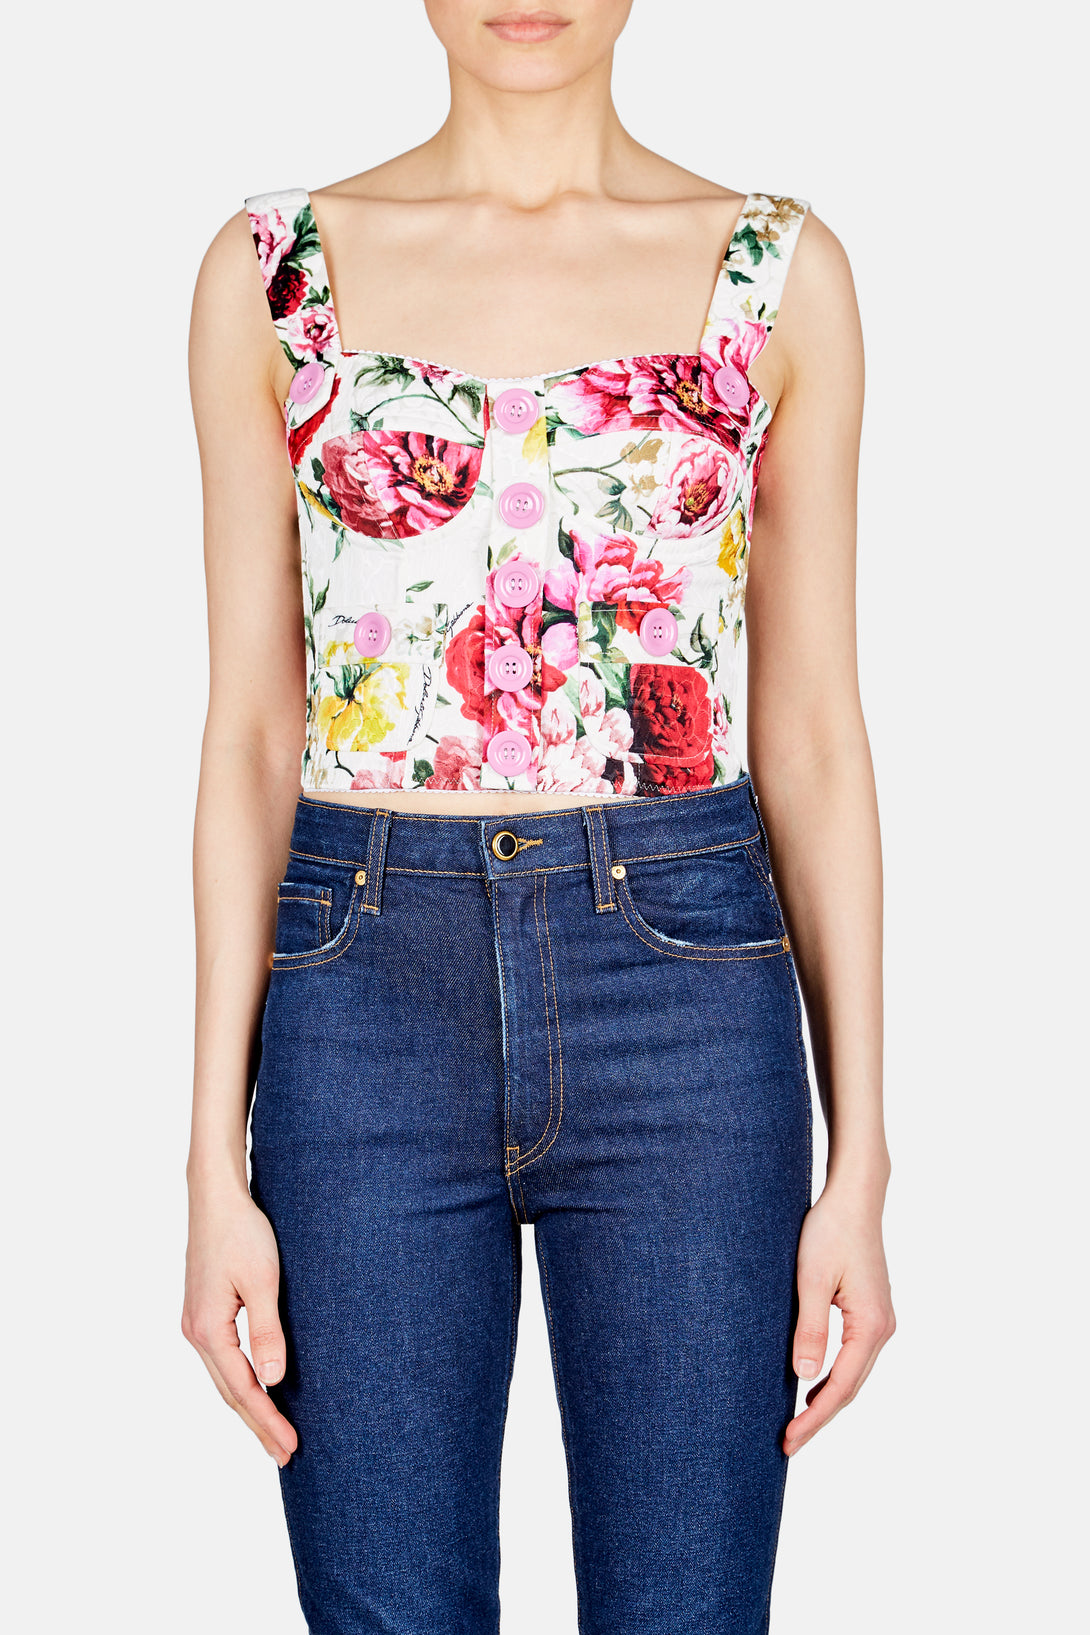 dolce and gabbana floral bustier top